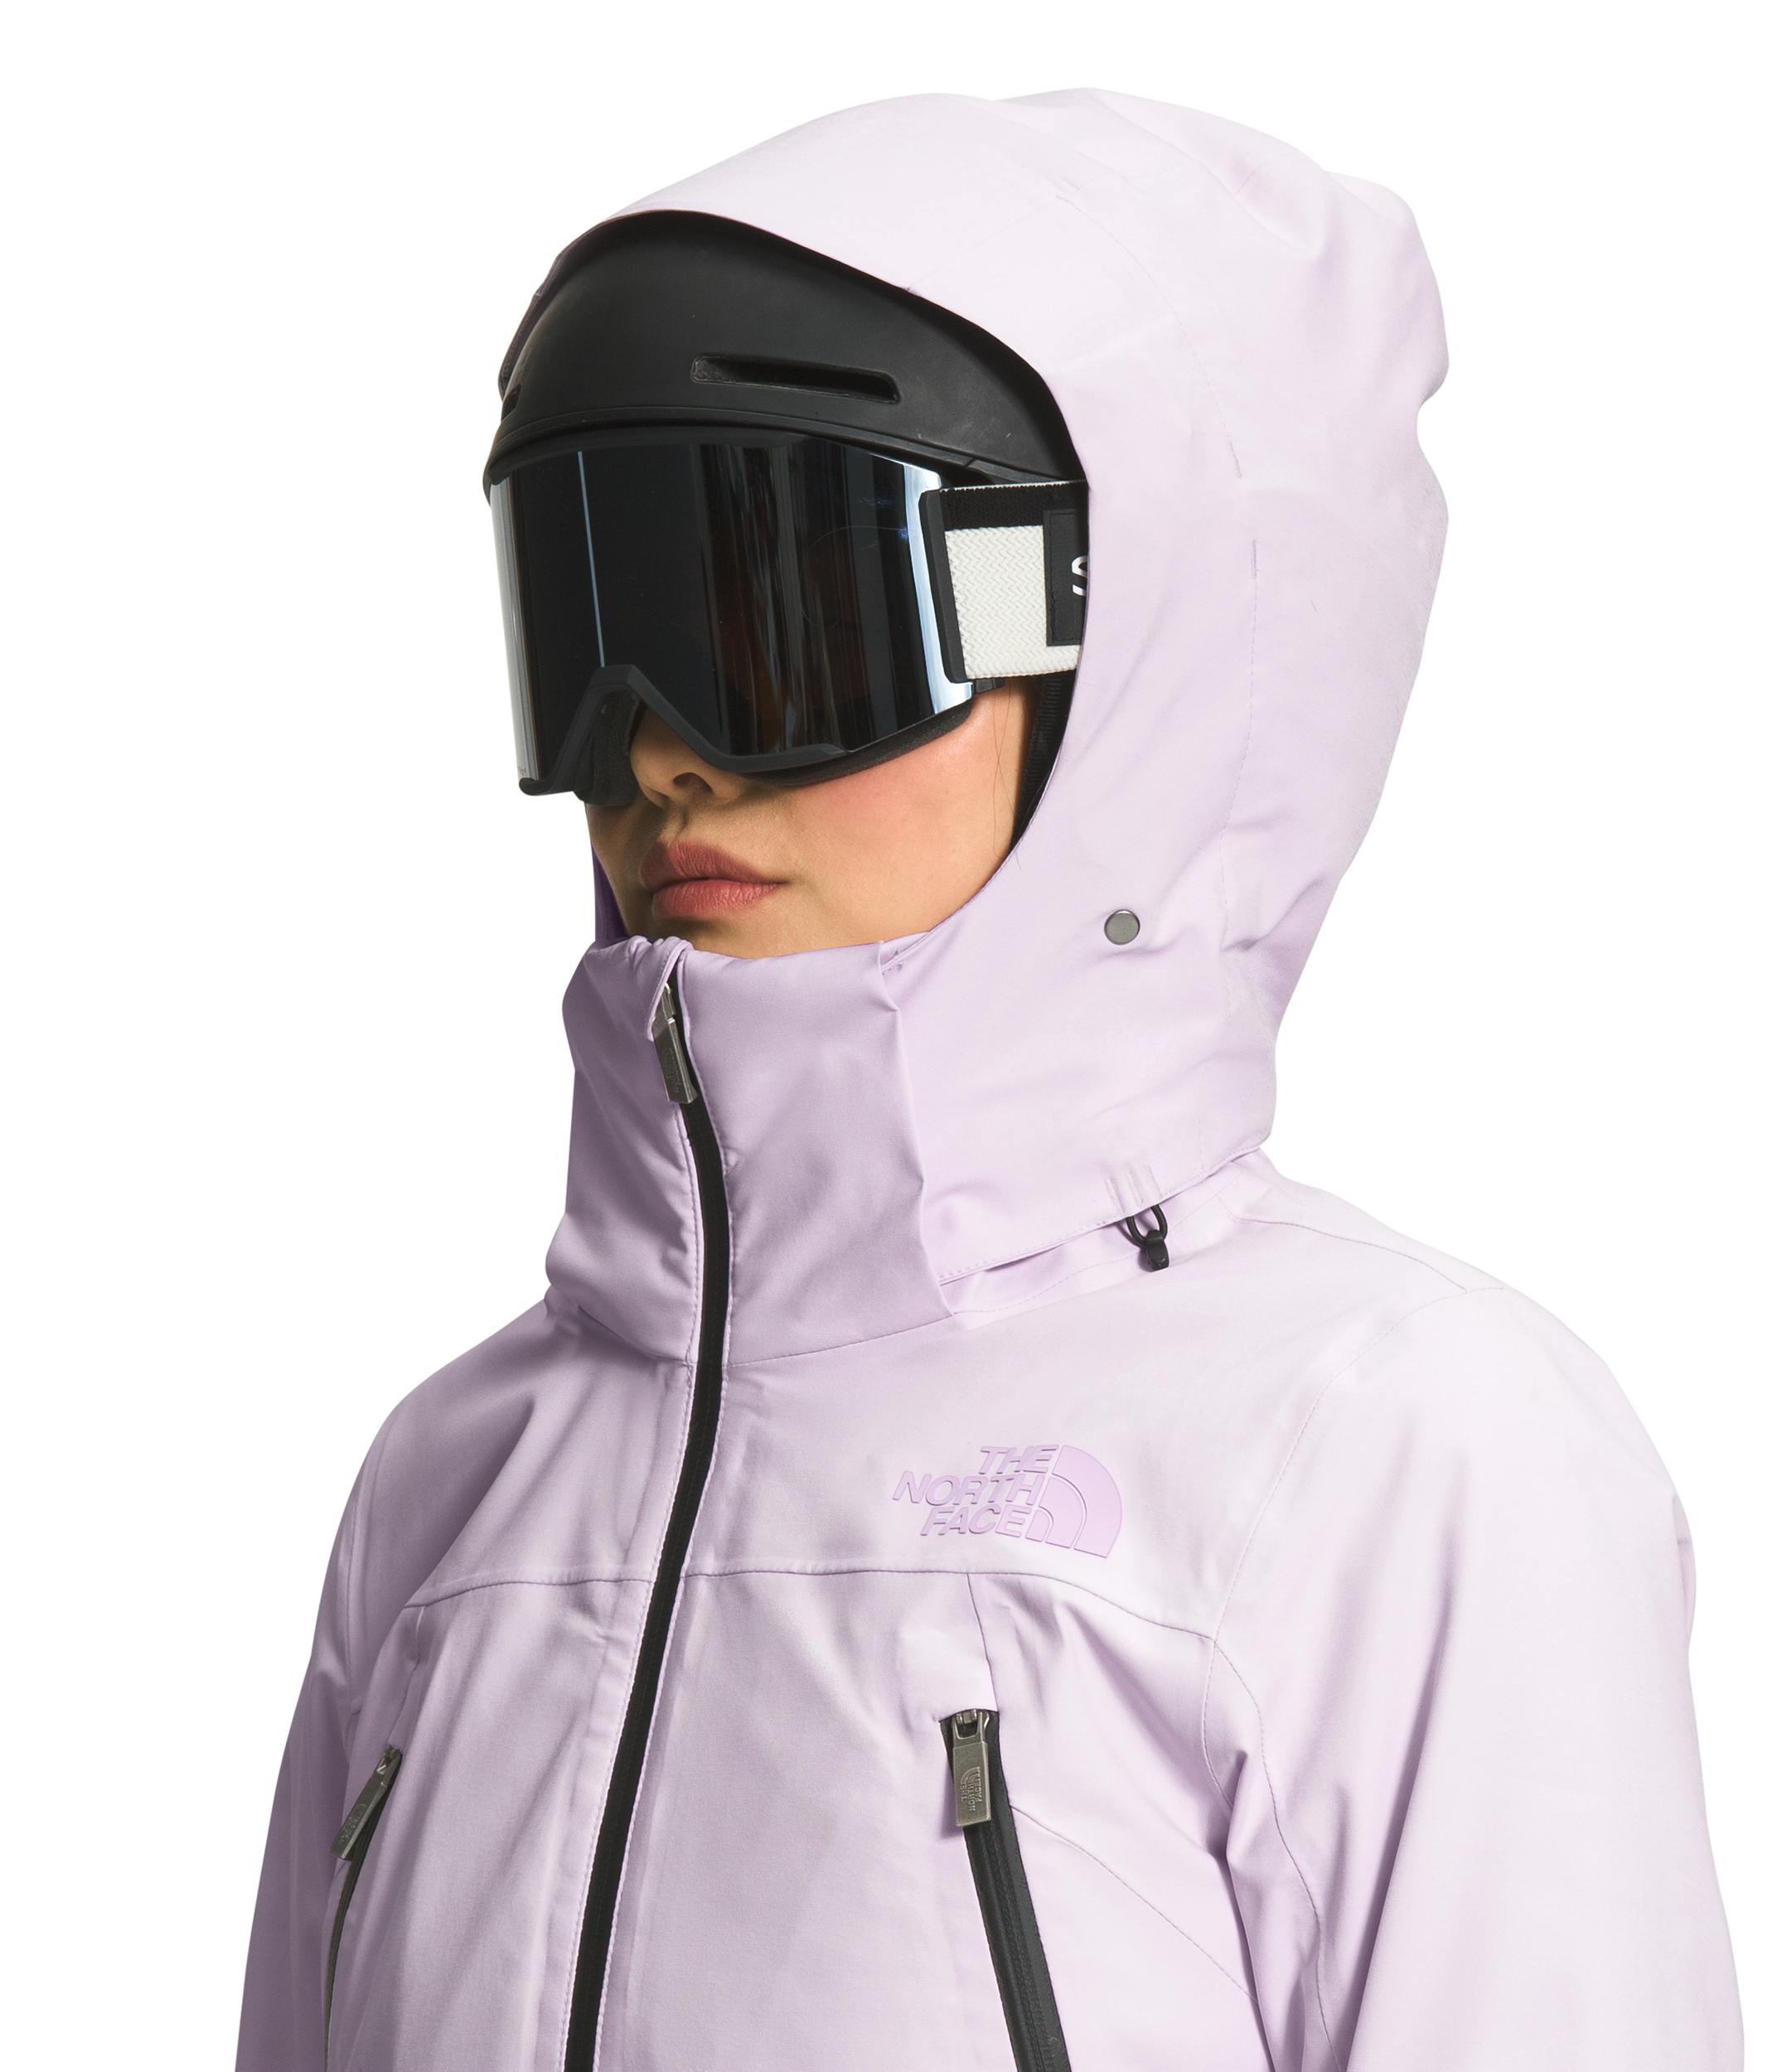 The North Face Women's Lenado 2L Insulated Jacket